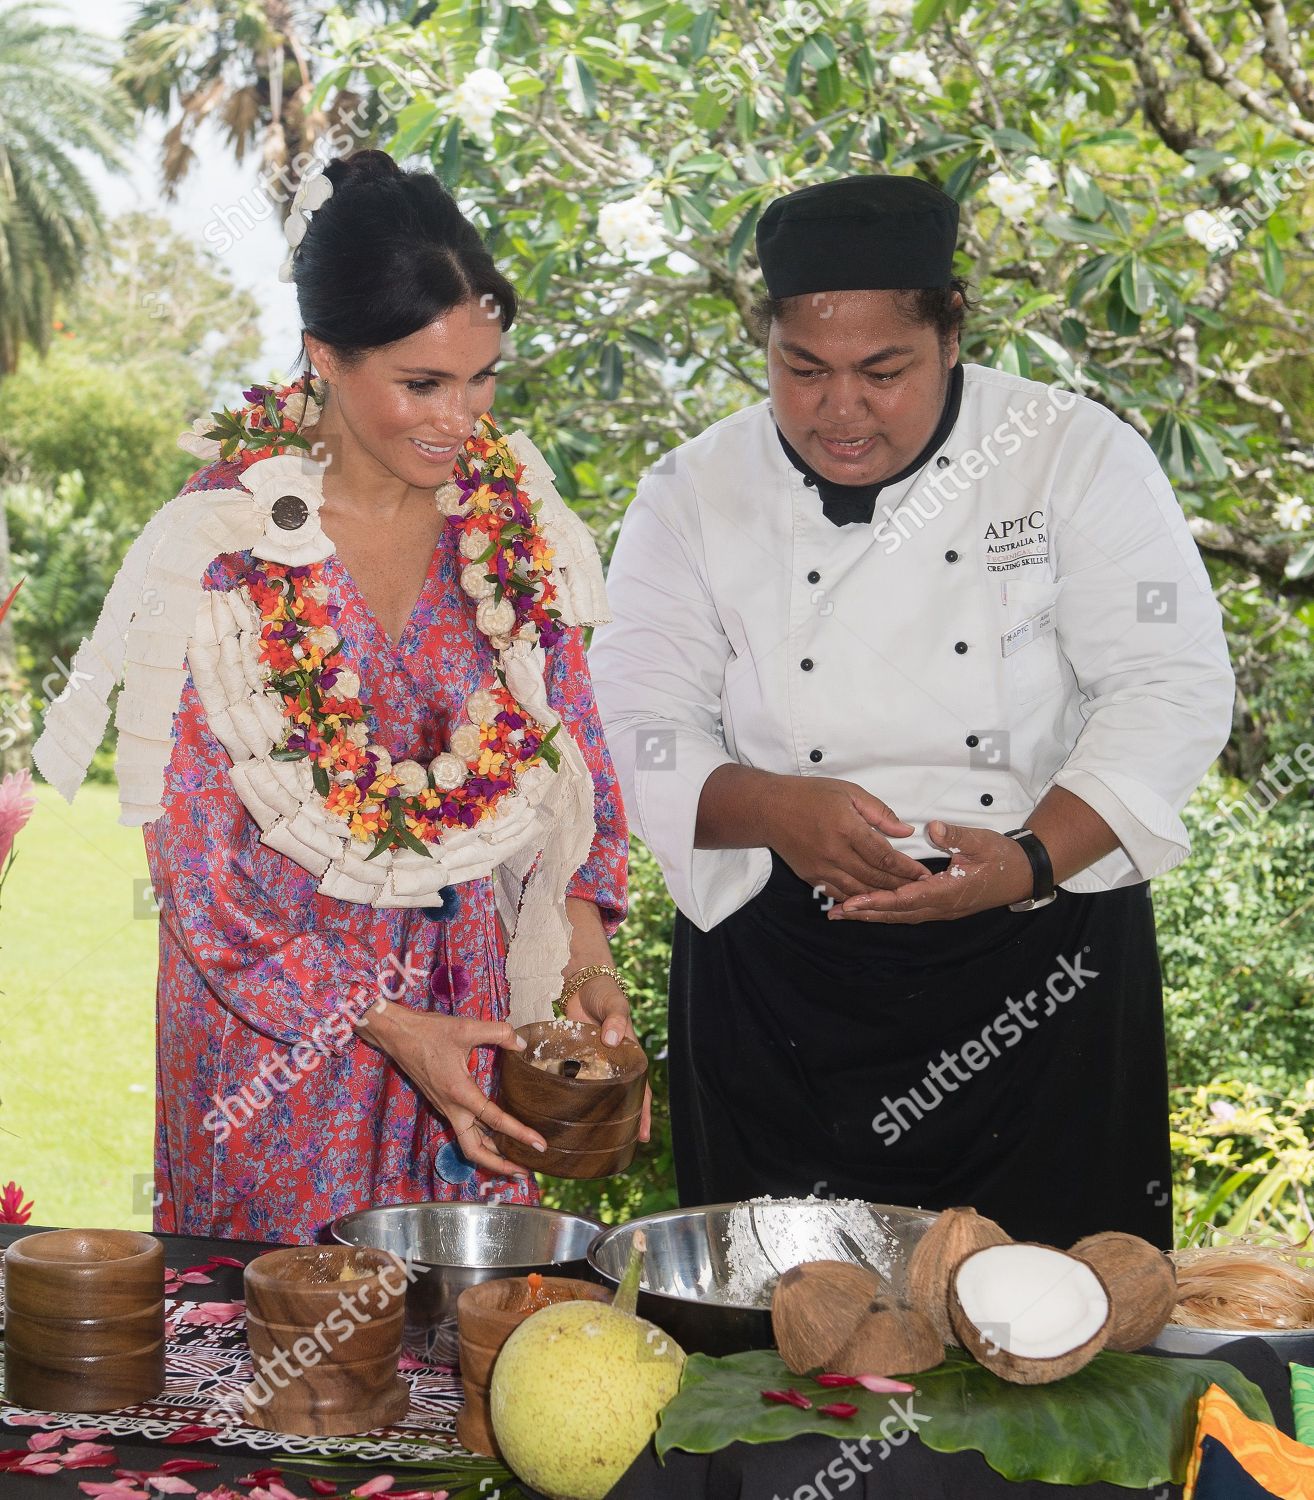 prince-harry-and-meghan-duchess-of-sussex-tour-of-fiji-shutterstock-editorial-9942863aa.jpg